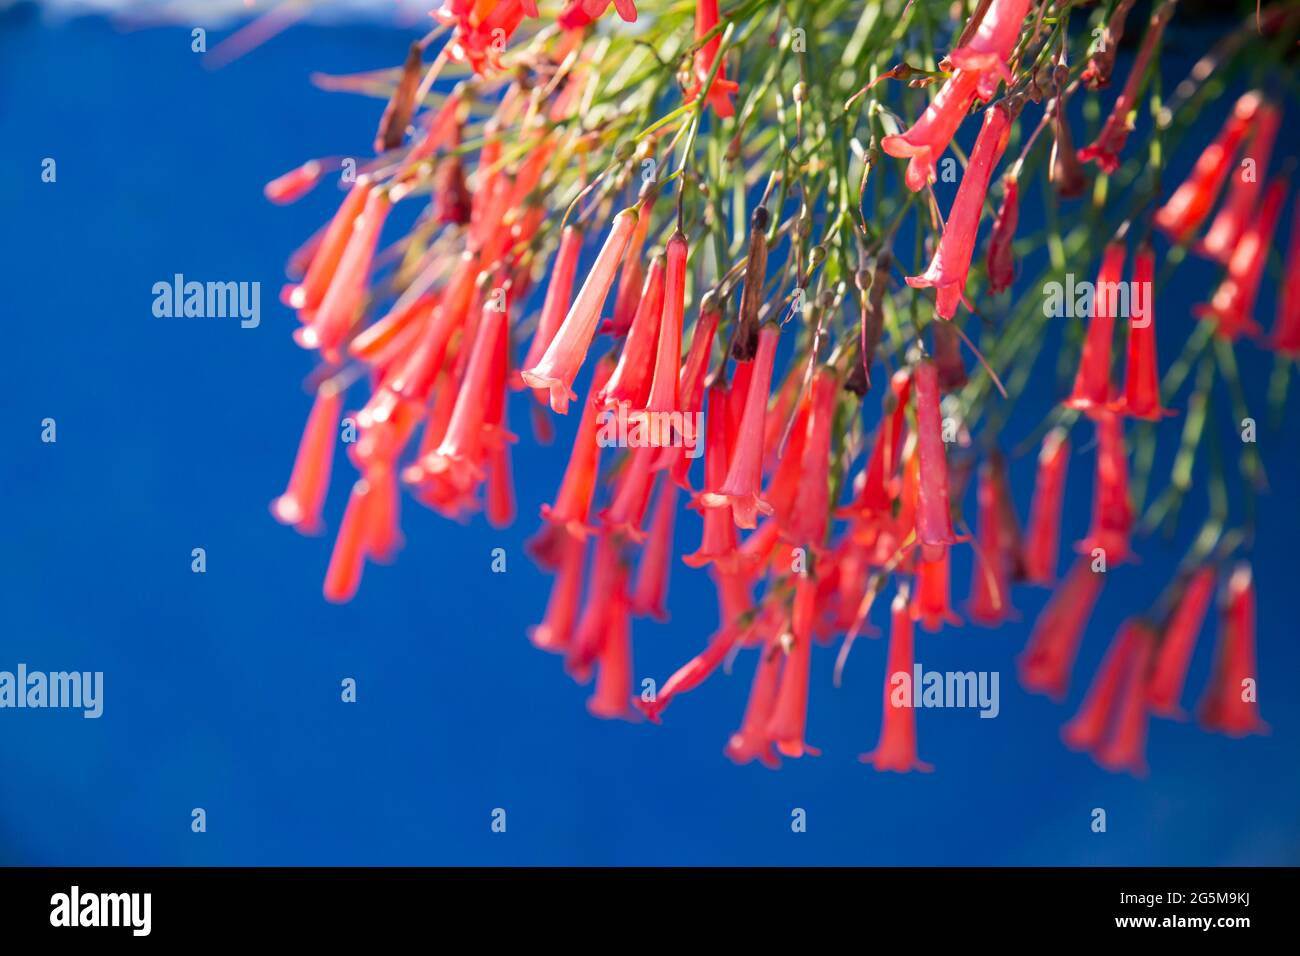 Close up of beautiful red firecracker fern flowers in clusters on a sunny day, in front of Aegean Blue background. Stock Photo